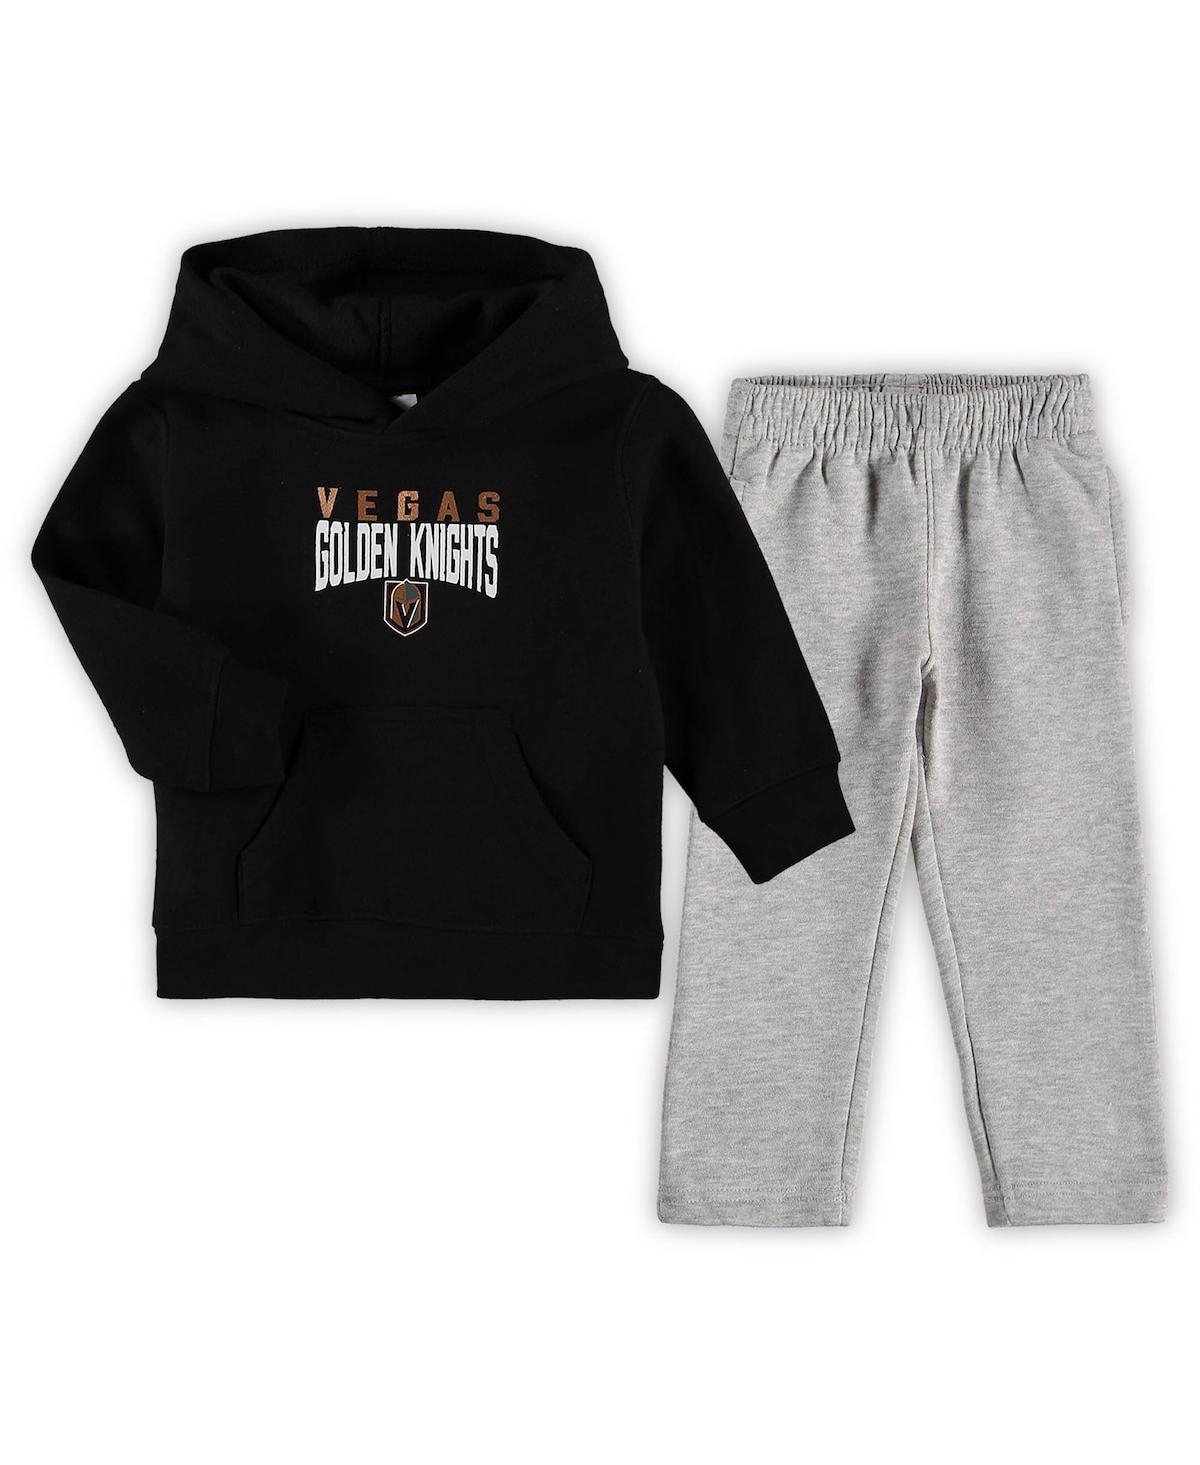 Outerstuff Babies' Toddler Boys Black, Heathered Gray Vegas Golden Knights Fan Flare Pullover Hoodie And Pants Set In Black,heathered Gray